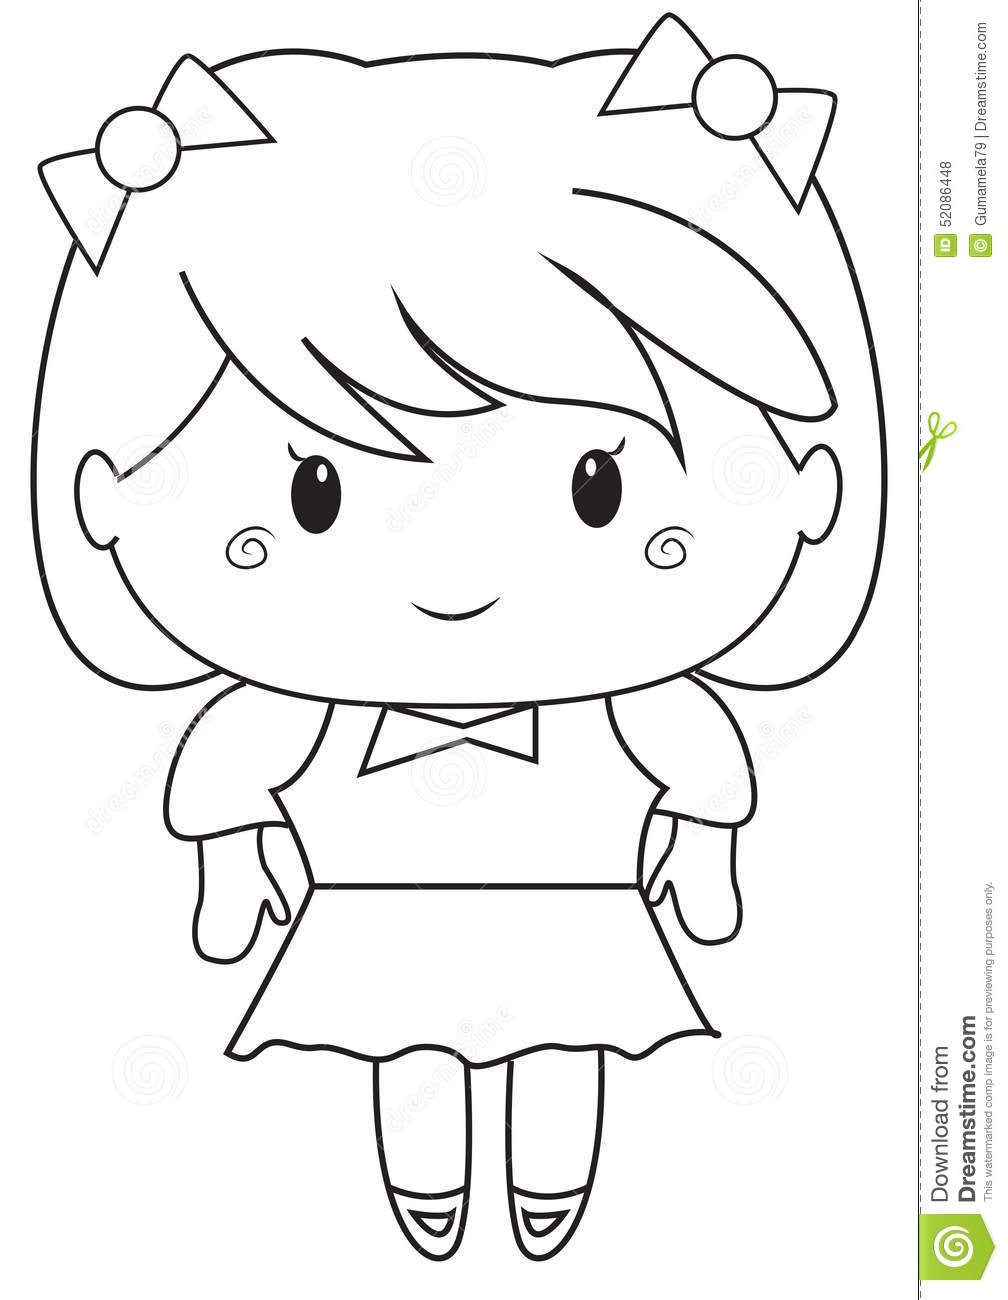 Coloring Books For Little Girls
 Little girl coloring page stock illustration Illustration